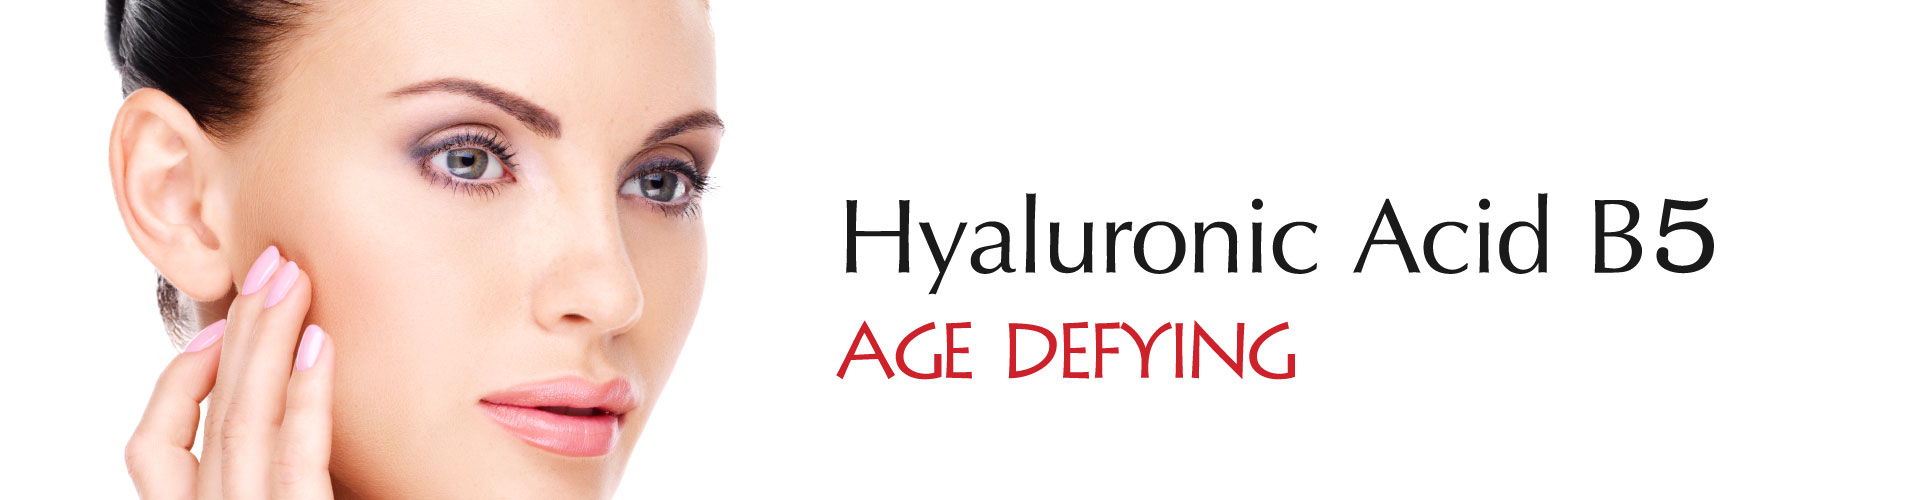 Hyaluronic Acid B5 Serum - ALBADERM Middle East - Skincare Products